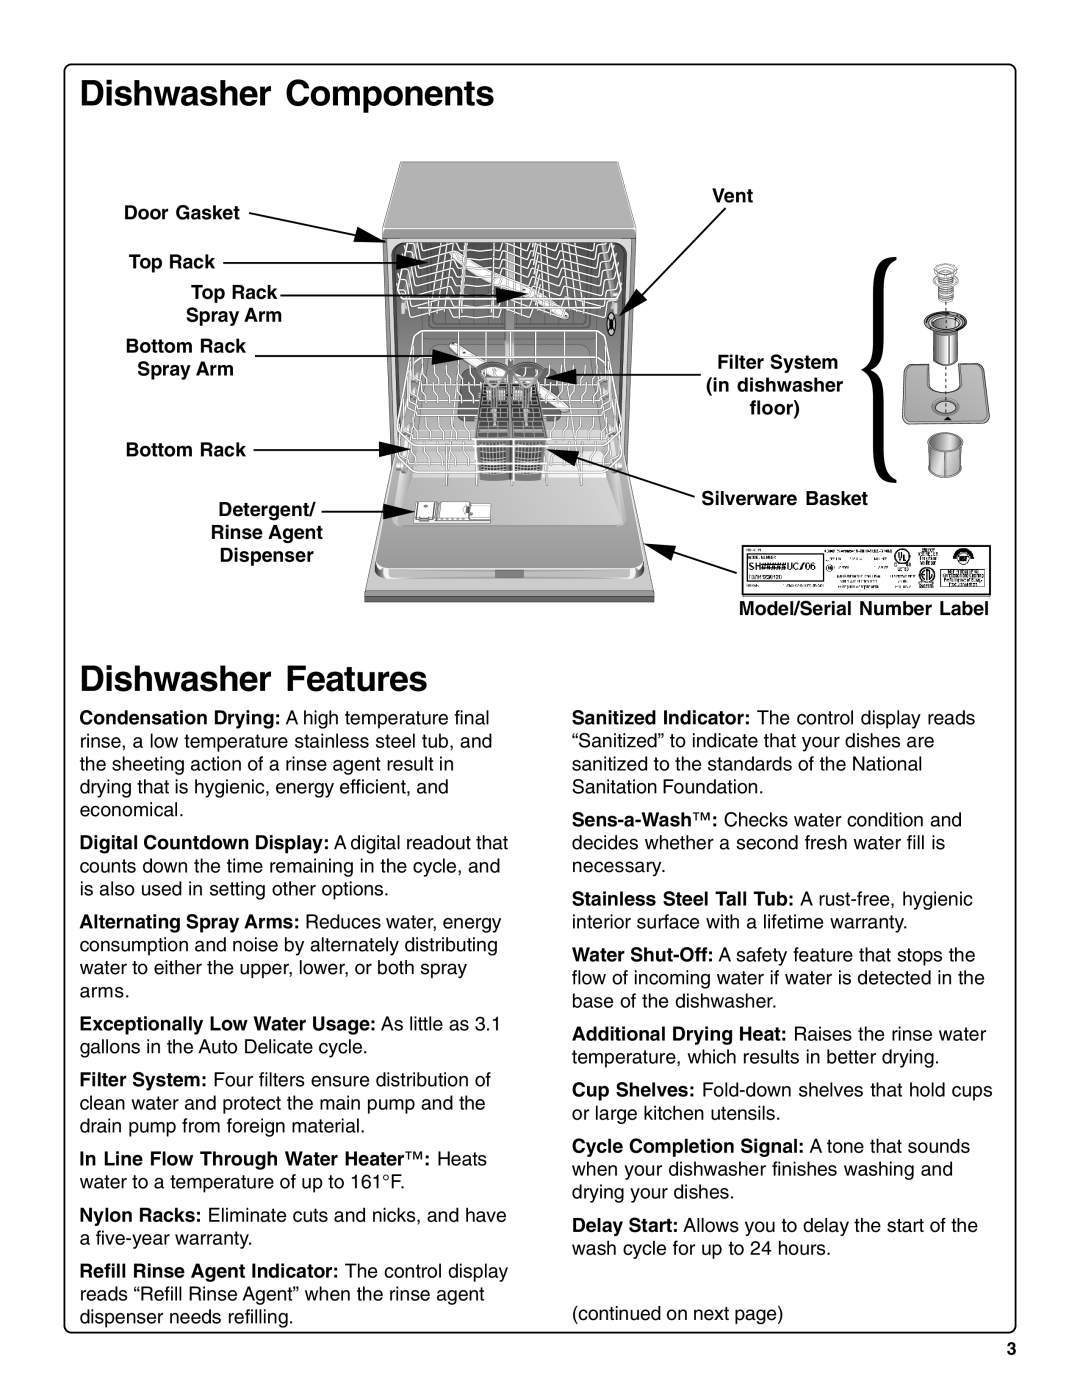 Thermador DWHD94BF Dishwasher Components, Dishwasher Features, Door Gasket, Vent, Top Rack, Spray Arm, Bottom Rack, floor 